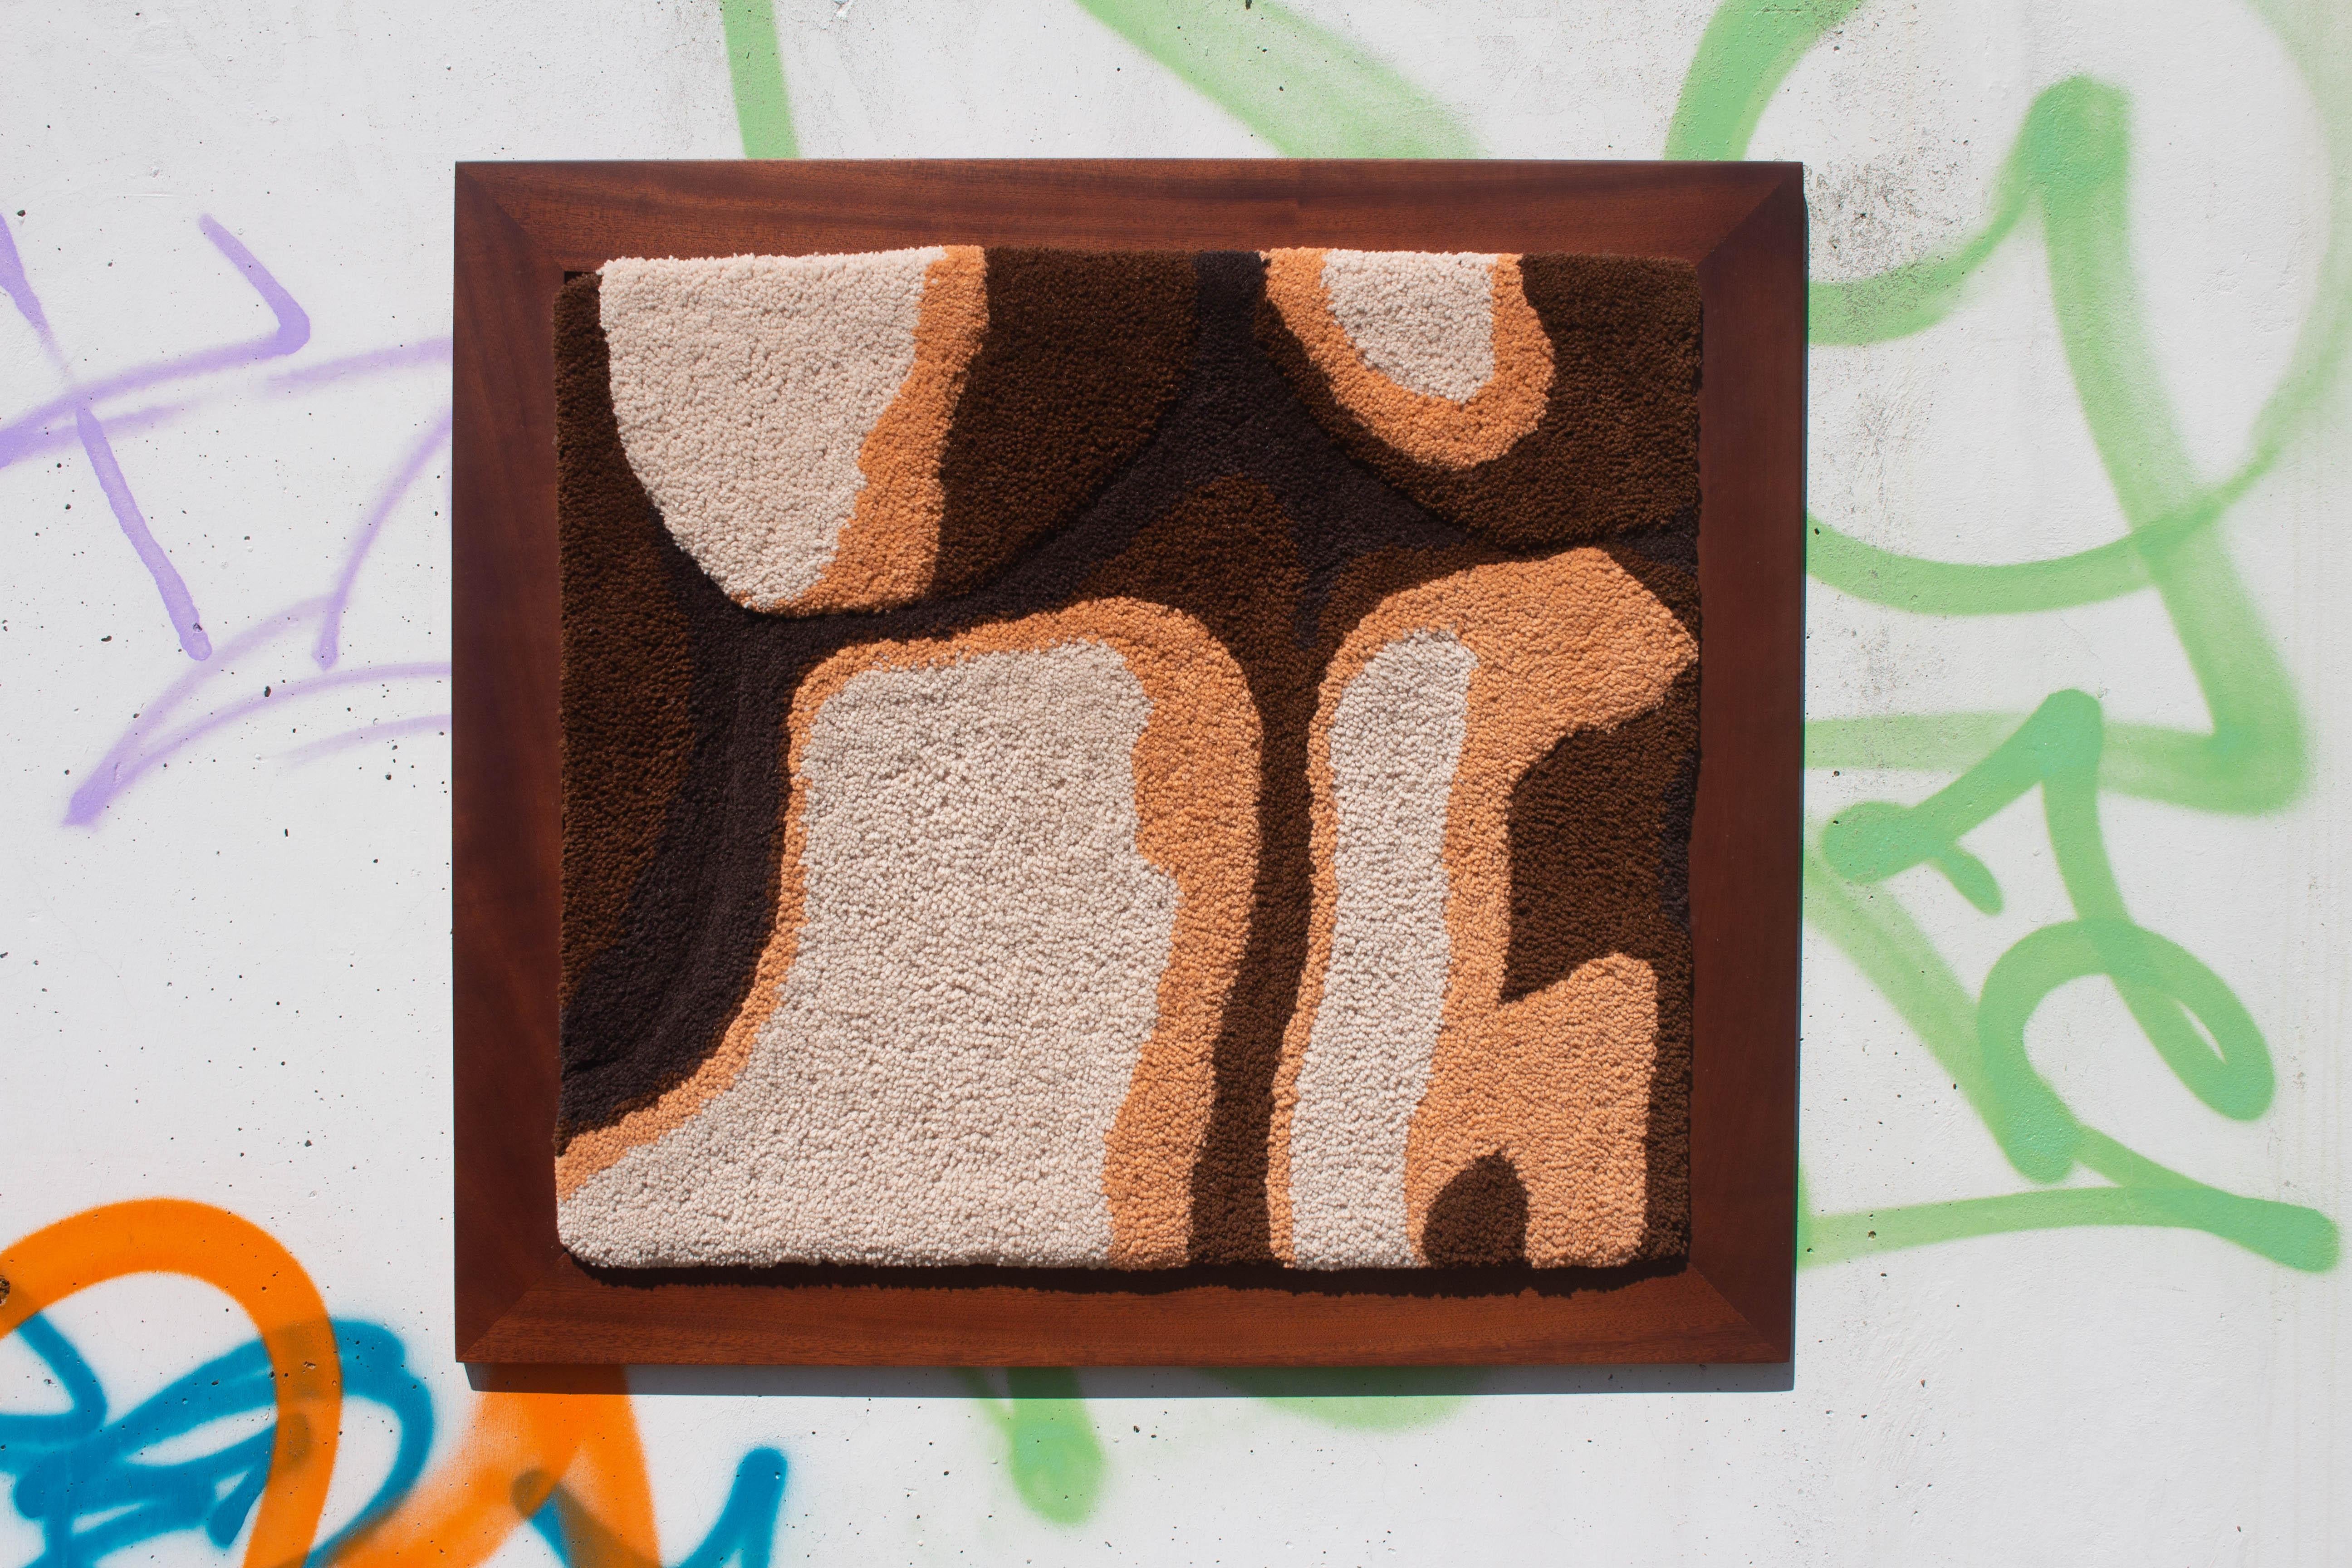 ABSTRACT LANDSCAPE V is part of a nude collection and is one of a kind contemporary artwork. Handmade using tufting technique and 100% Portuguese wool yarn with anti-moth treatment. The bass-relief is carved with scissors, creating different heights